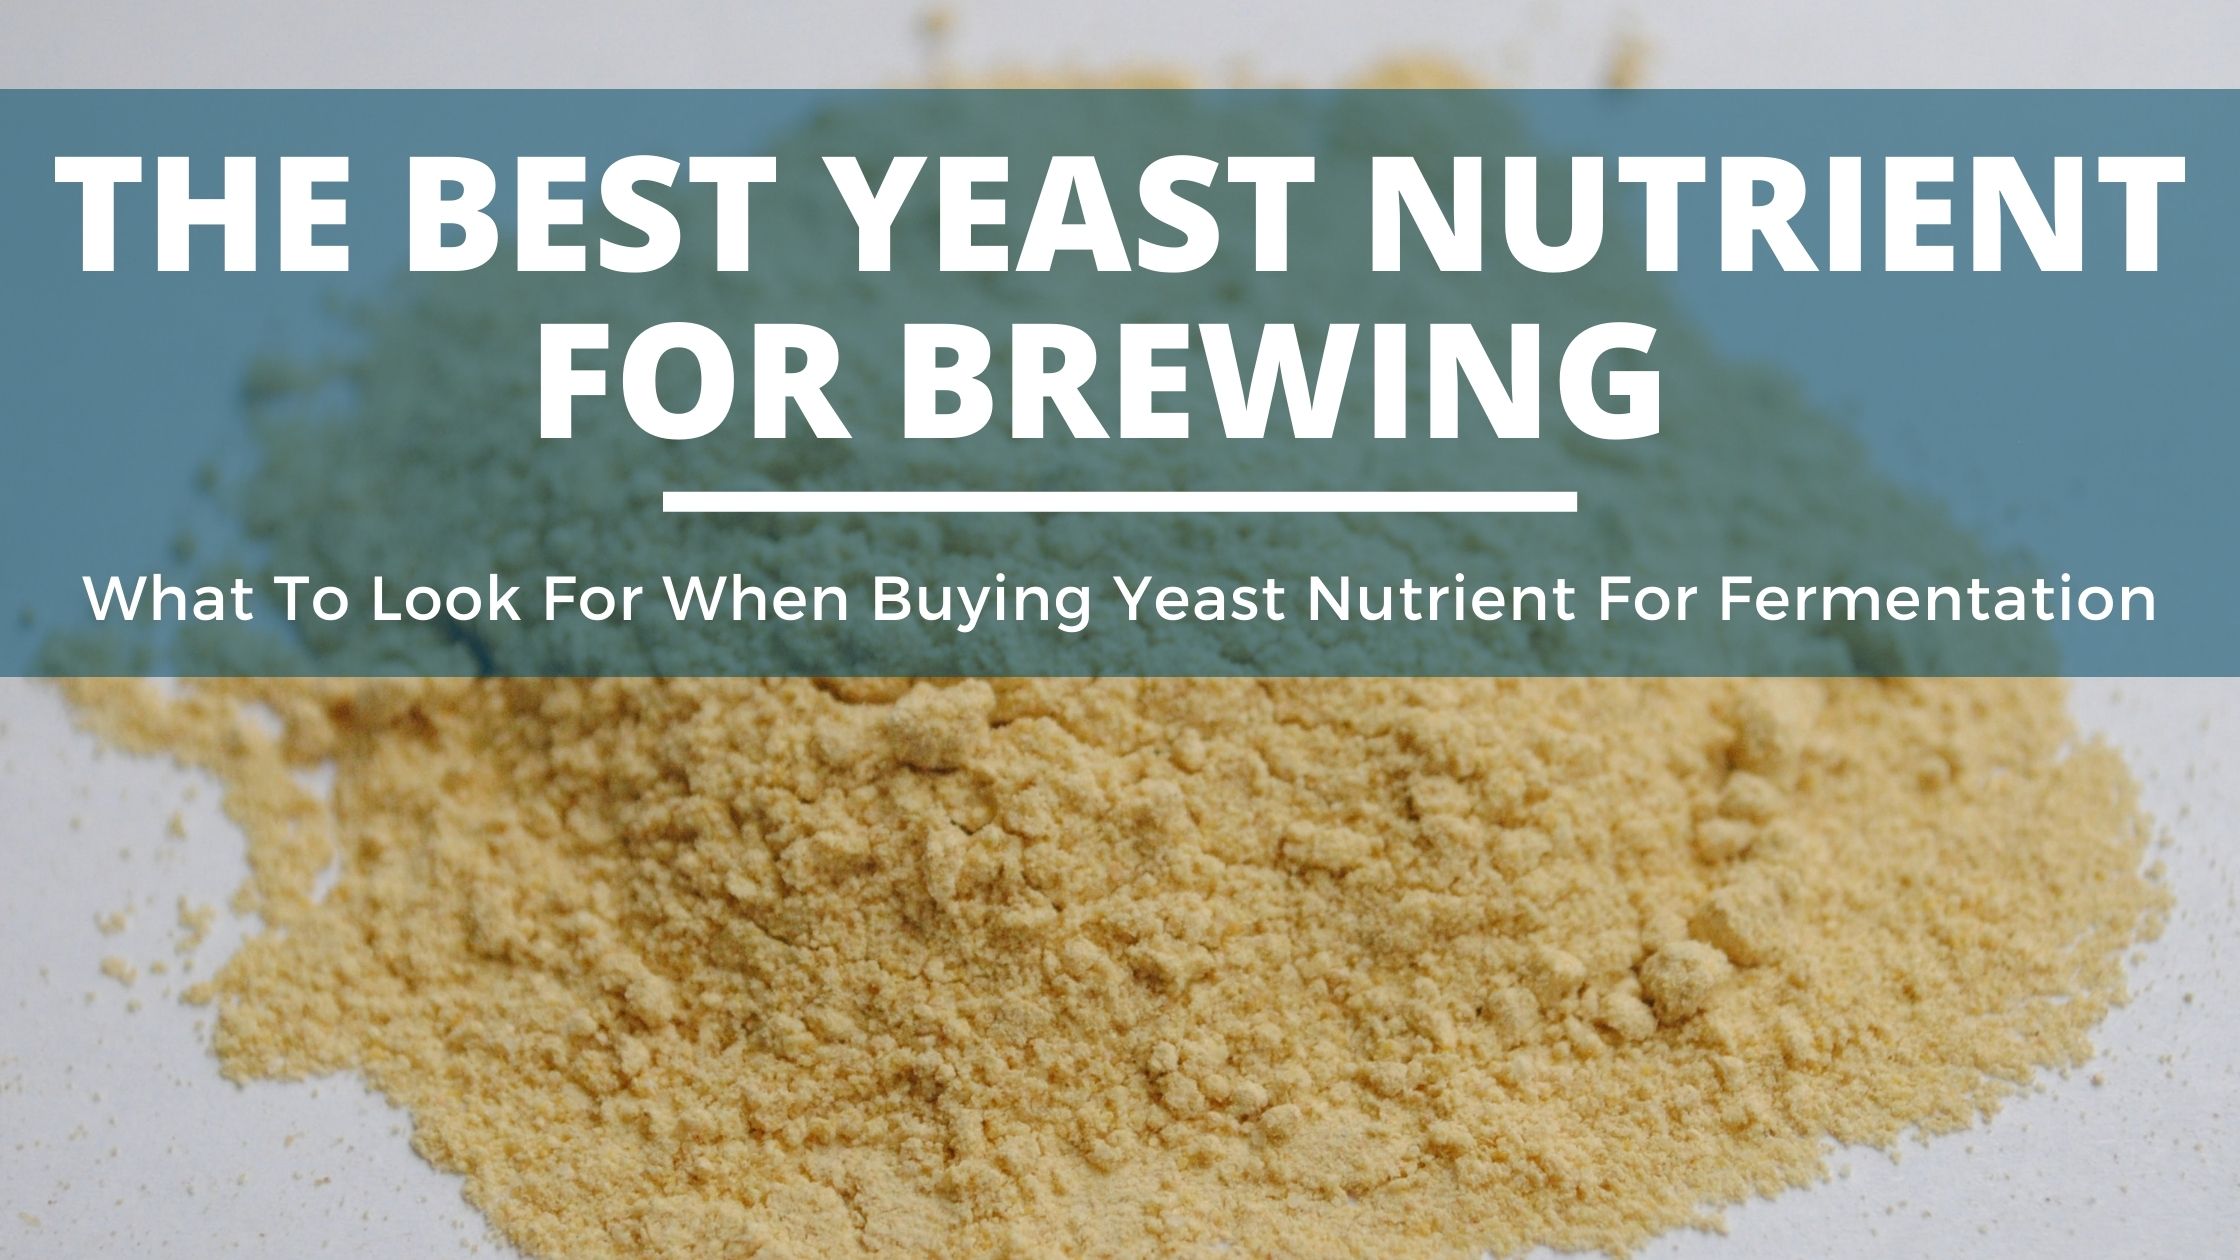 The Best Yeast Nutrient For Homebrewing and Distilling (In 2022)